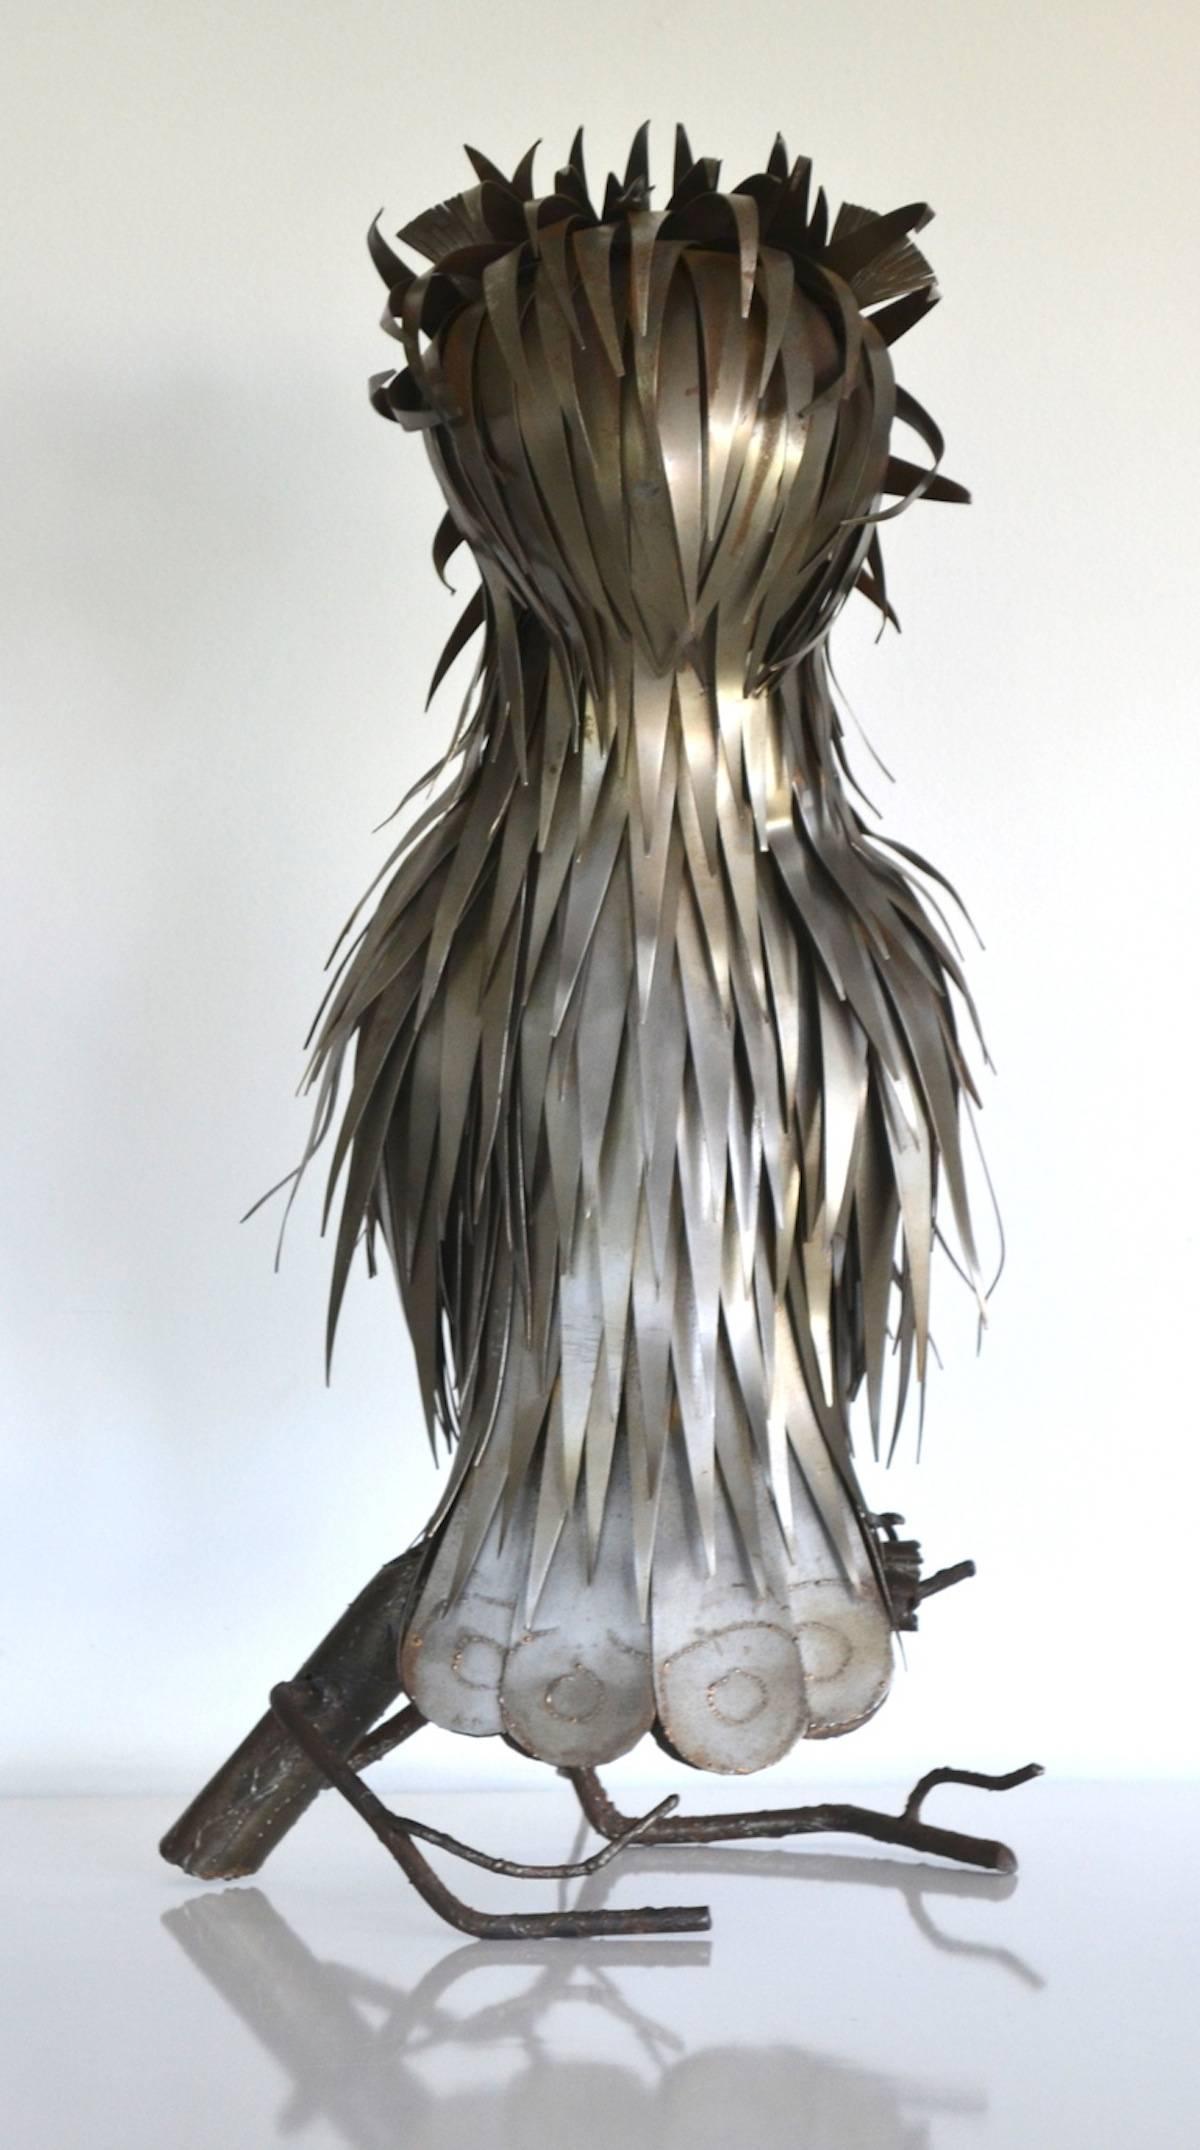 Midcentury Brutalist Inspired French Sculptural Owl Form Table Lamp by Jarry In Good Condition For Sale In West Palm Beach, FL